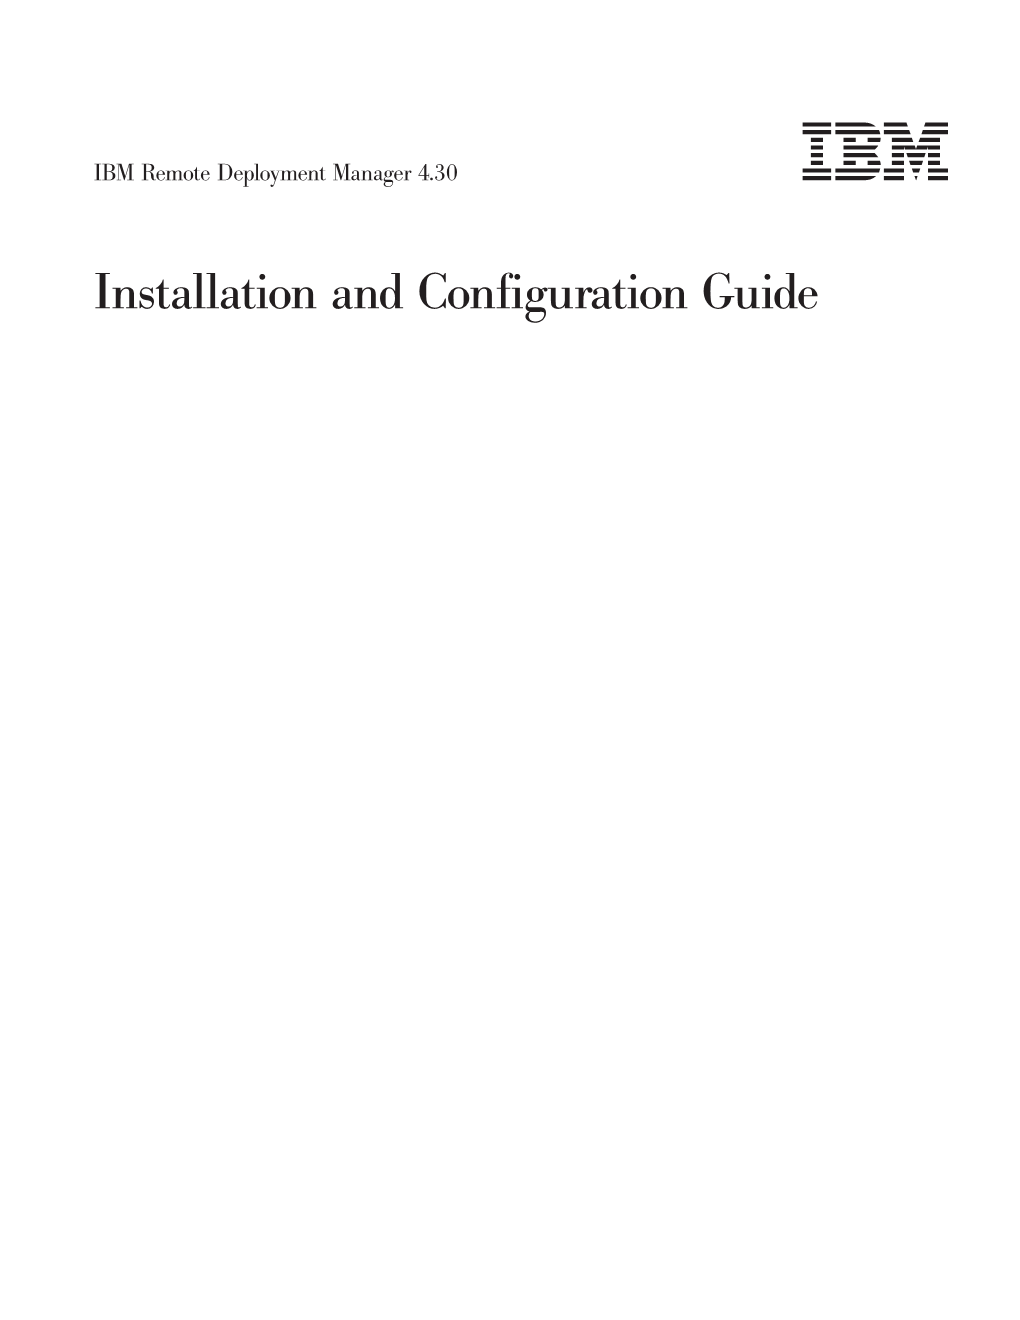 IBM Remote Deployment Manager 4.30: Installation and Configuration Guide